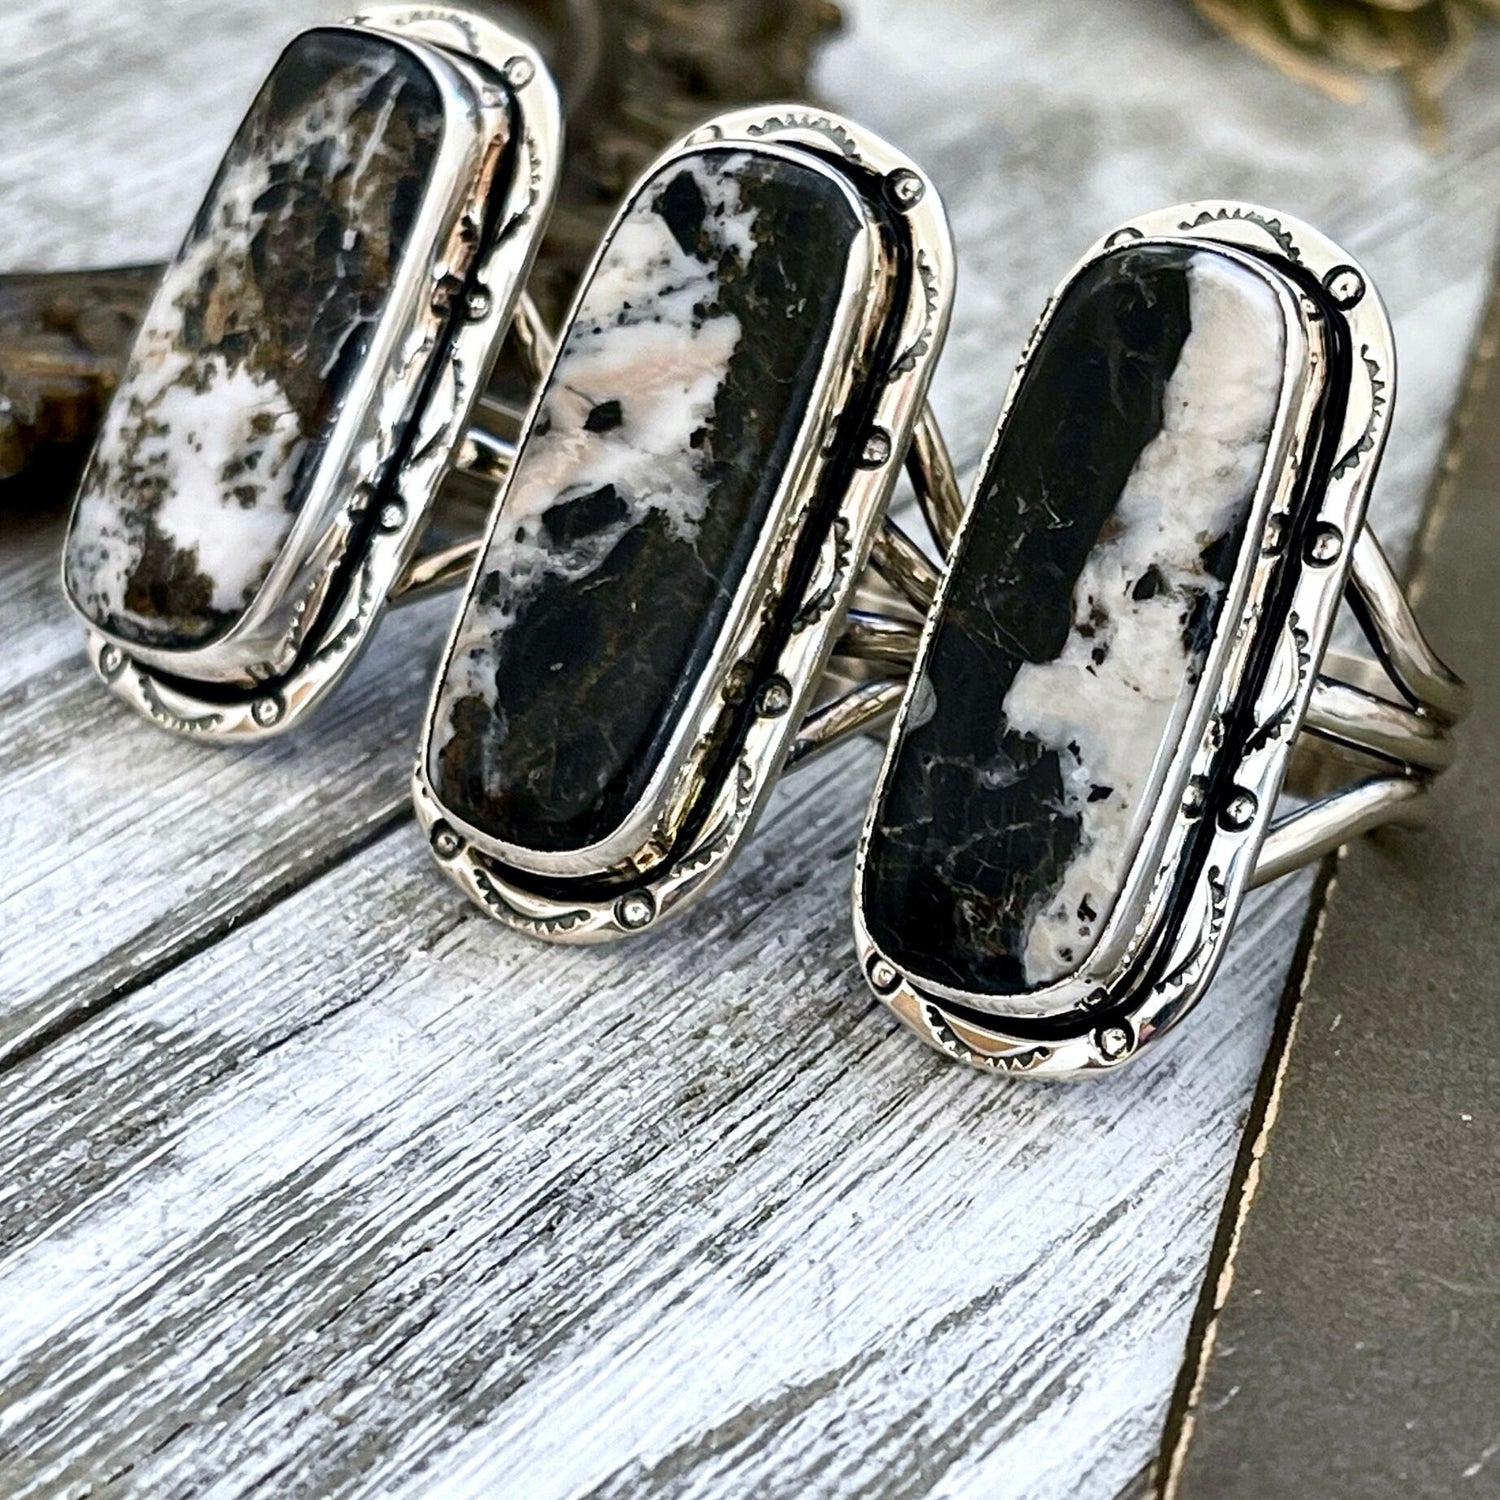 Size 10 Stunning White Buffalo Statement Ring Set in Sterling Silver / Curated by FOXLARK Collection